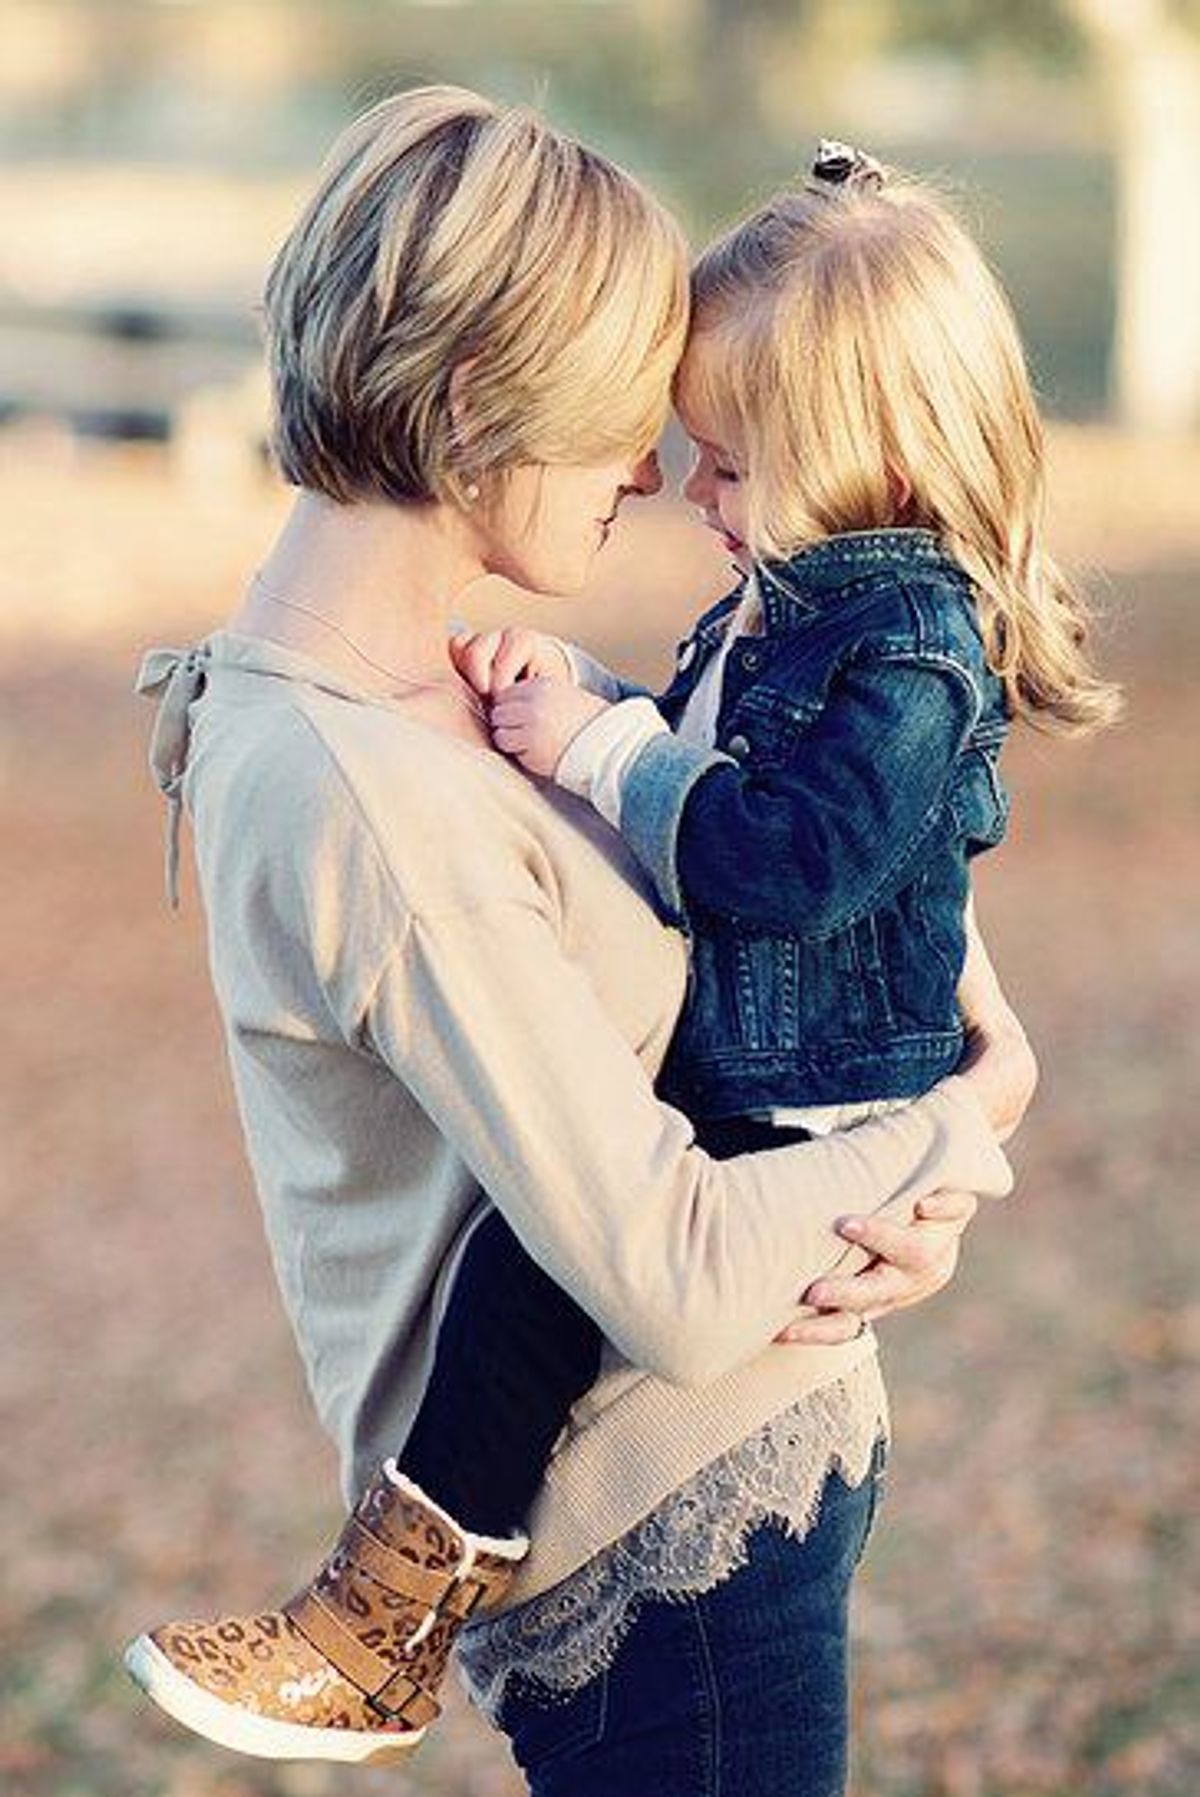 4 Things Being Raised By A Single Mother Has Taught Me